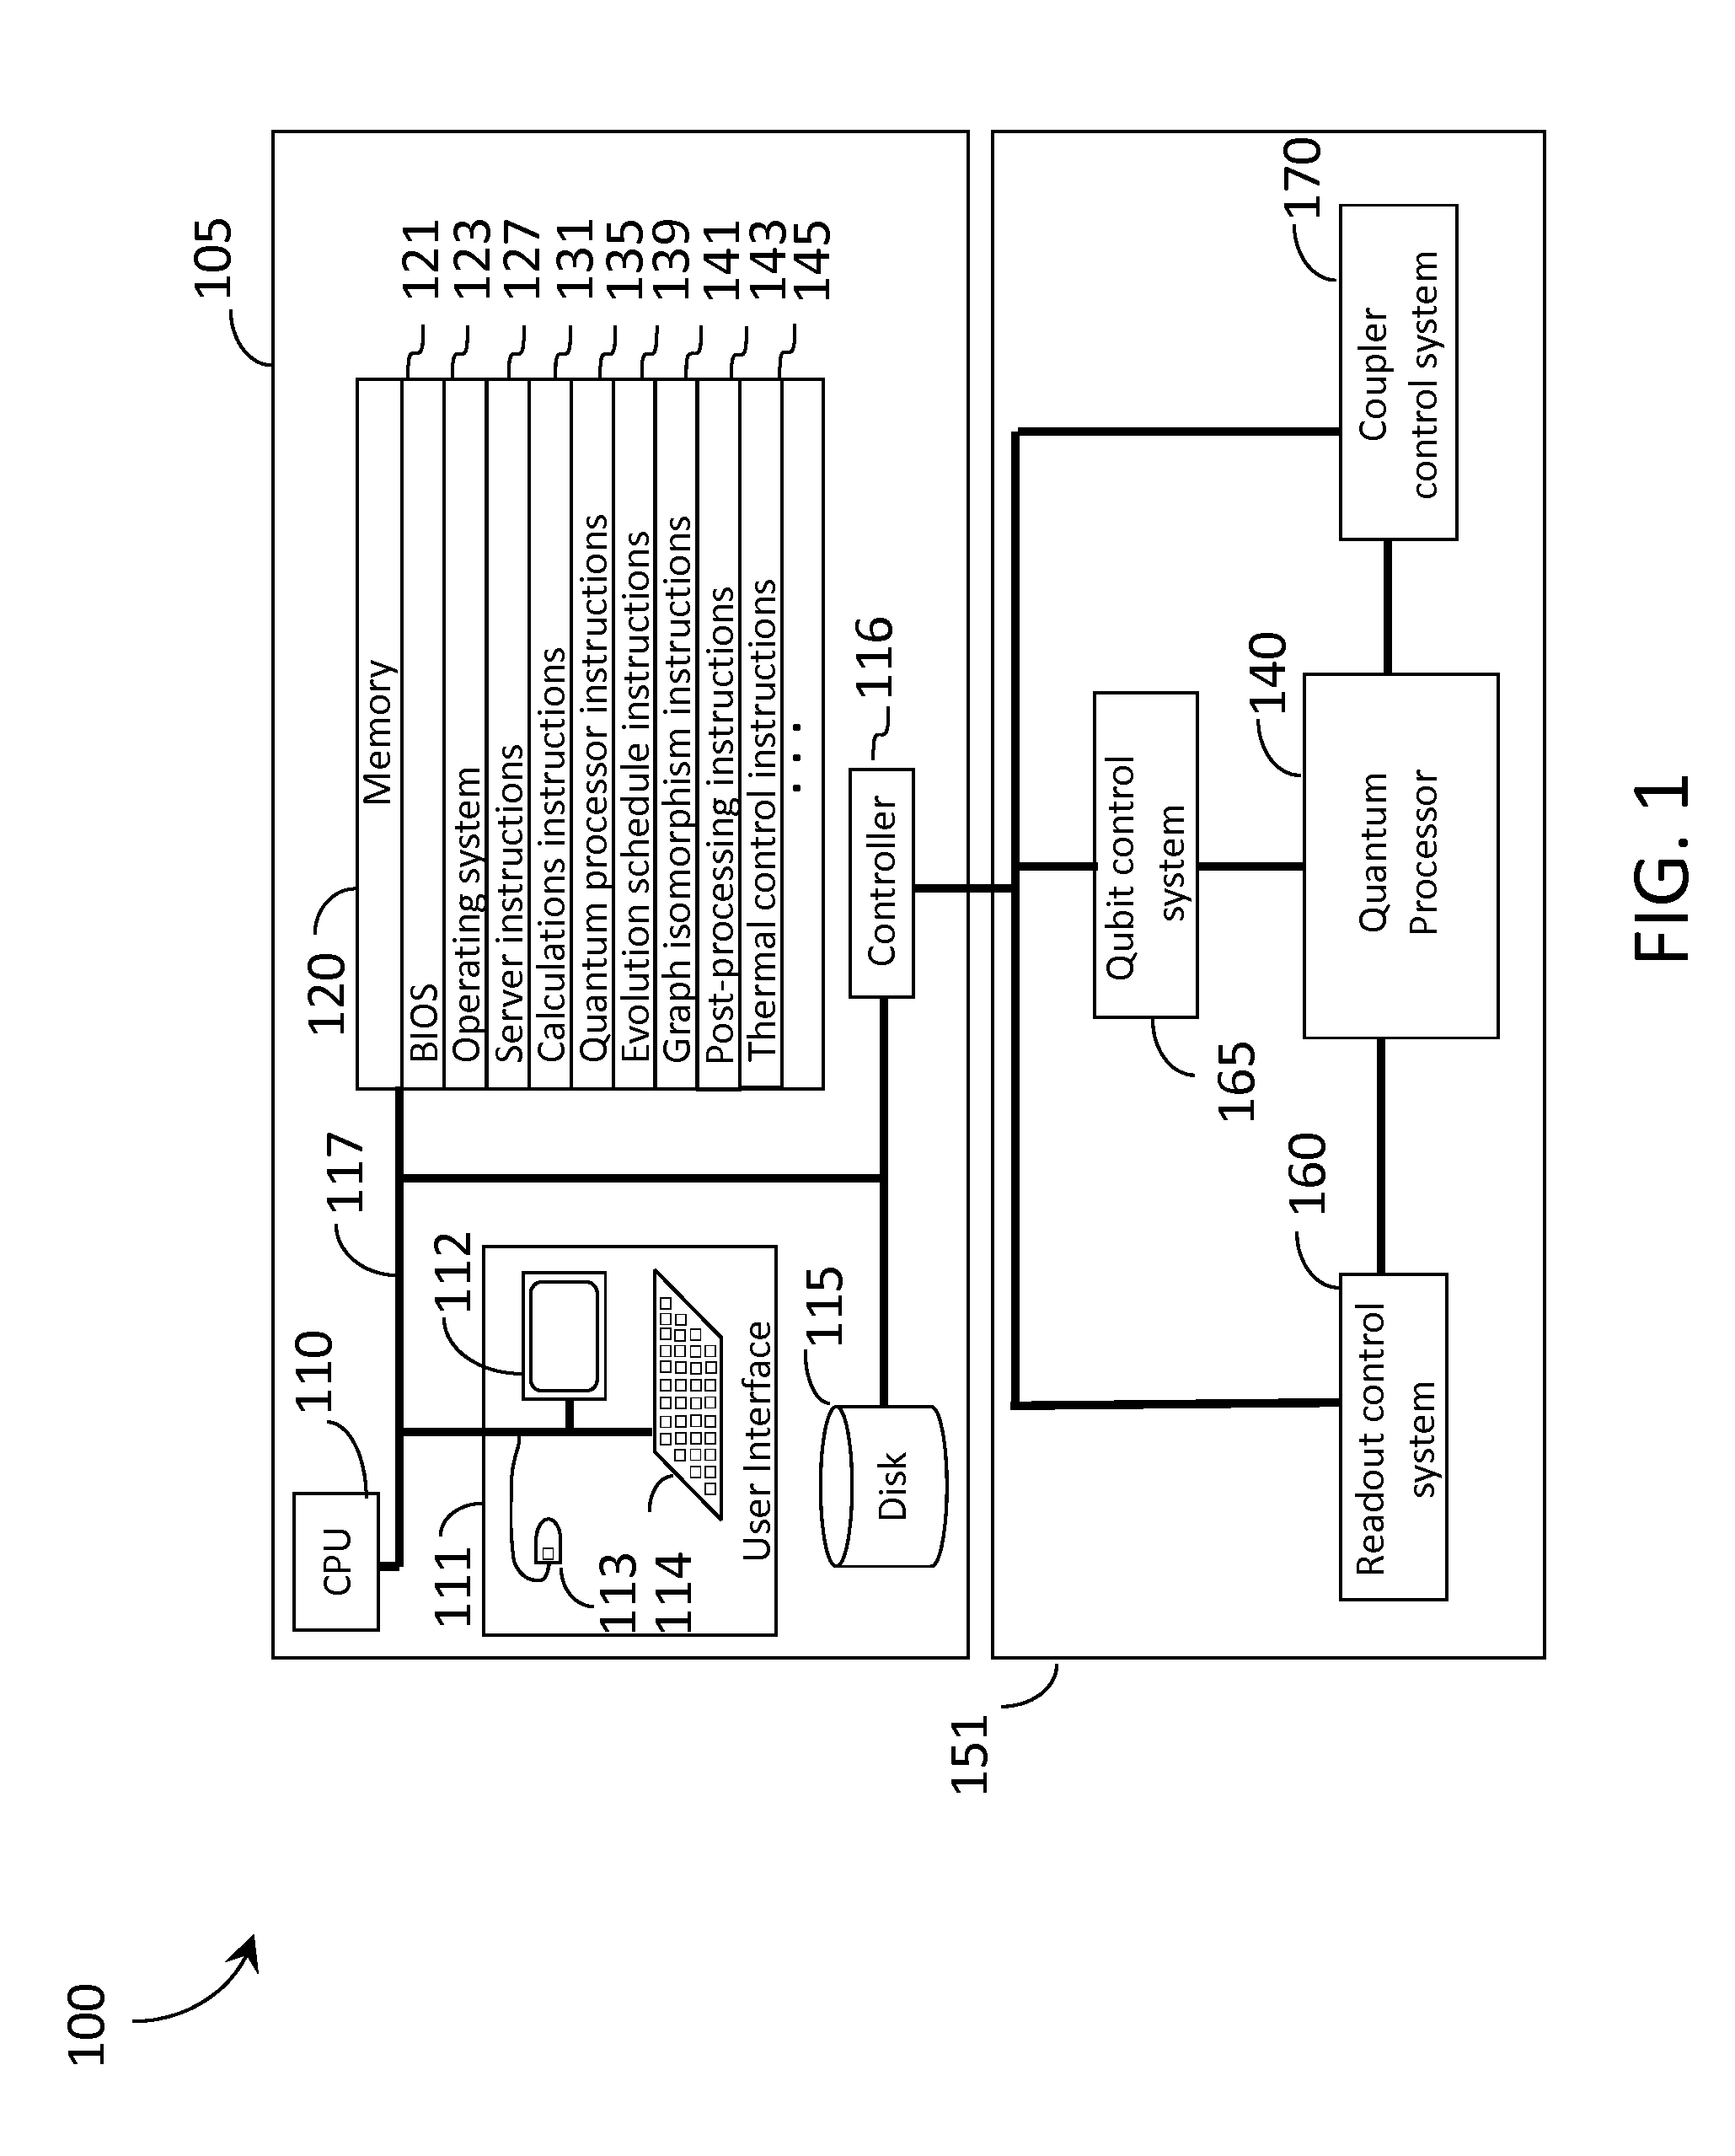 Systems and methods employing new evolution schedules in an analog computer with applications to determining isomorphic graphs and post-processing solutions